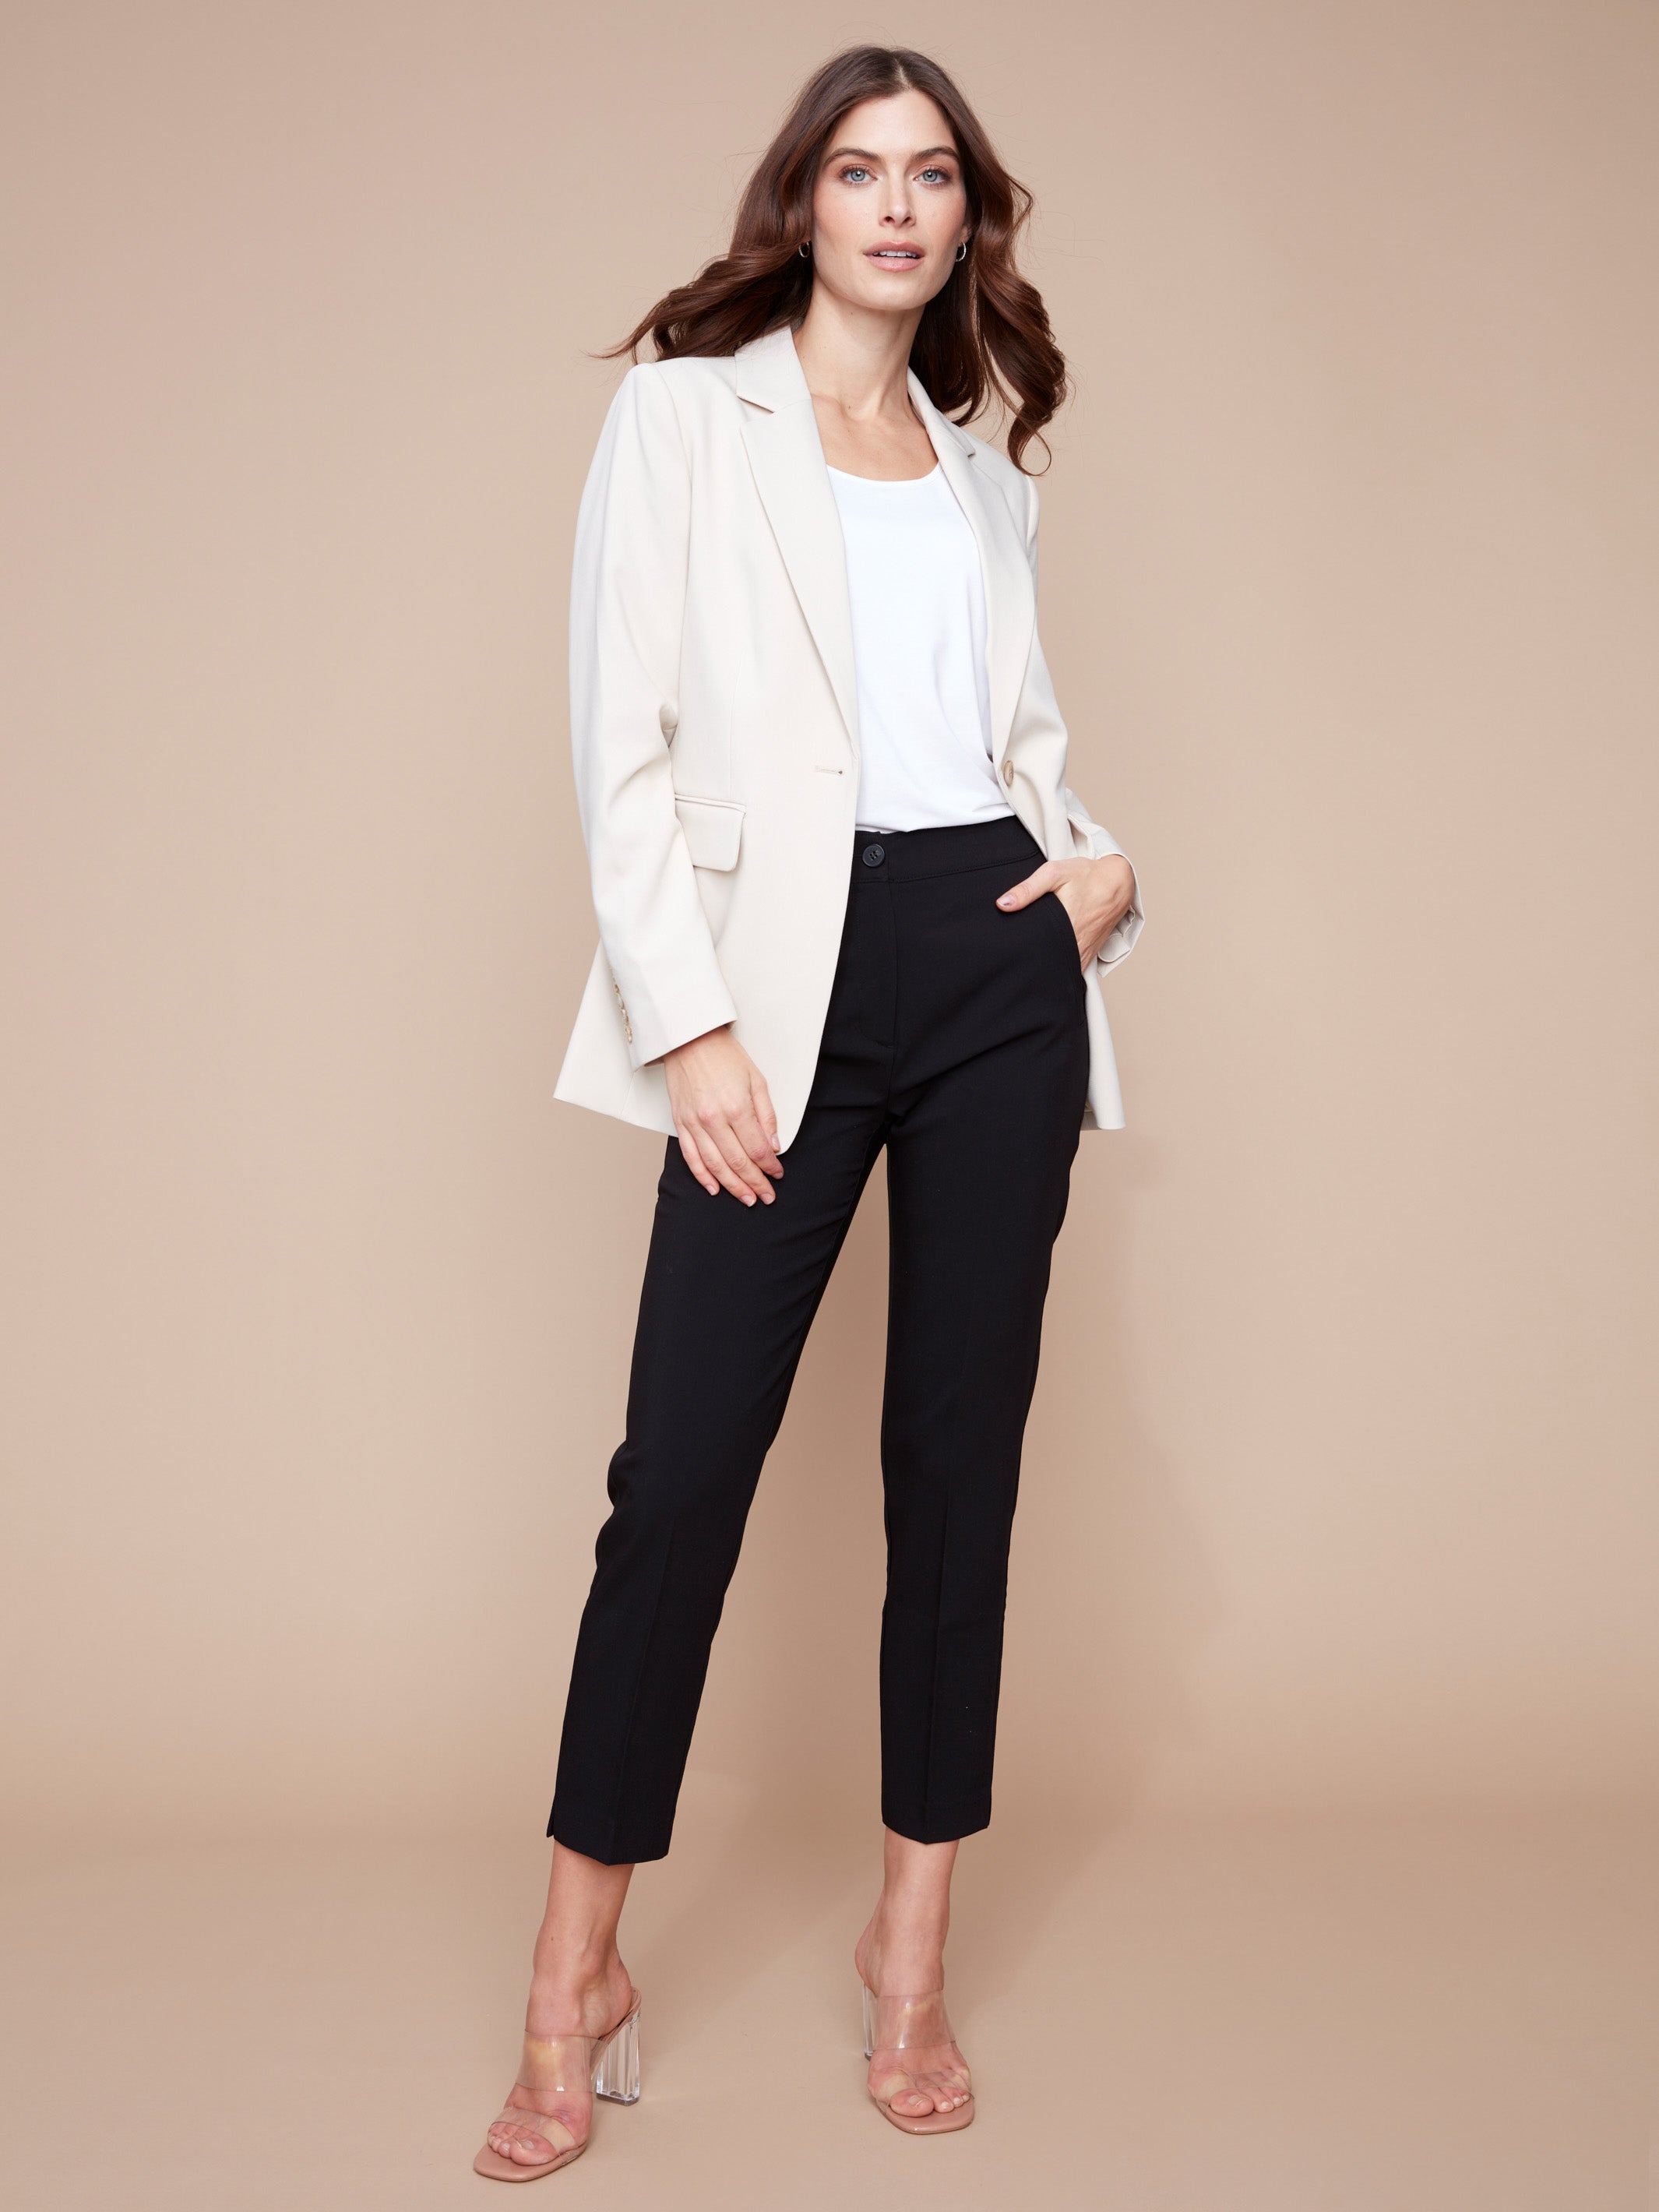 Charlie B Workwear Collection - Blazers, Pants and Tops for Women